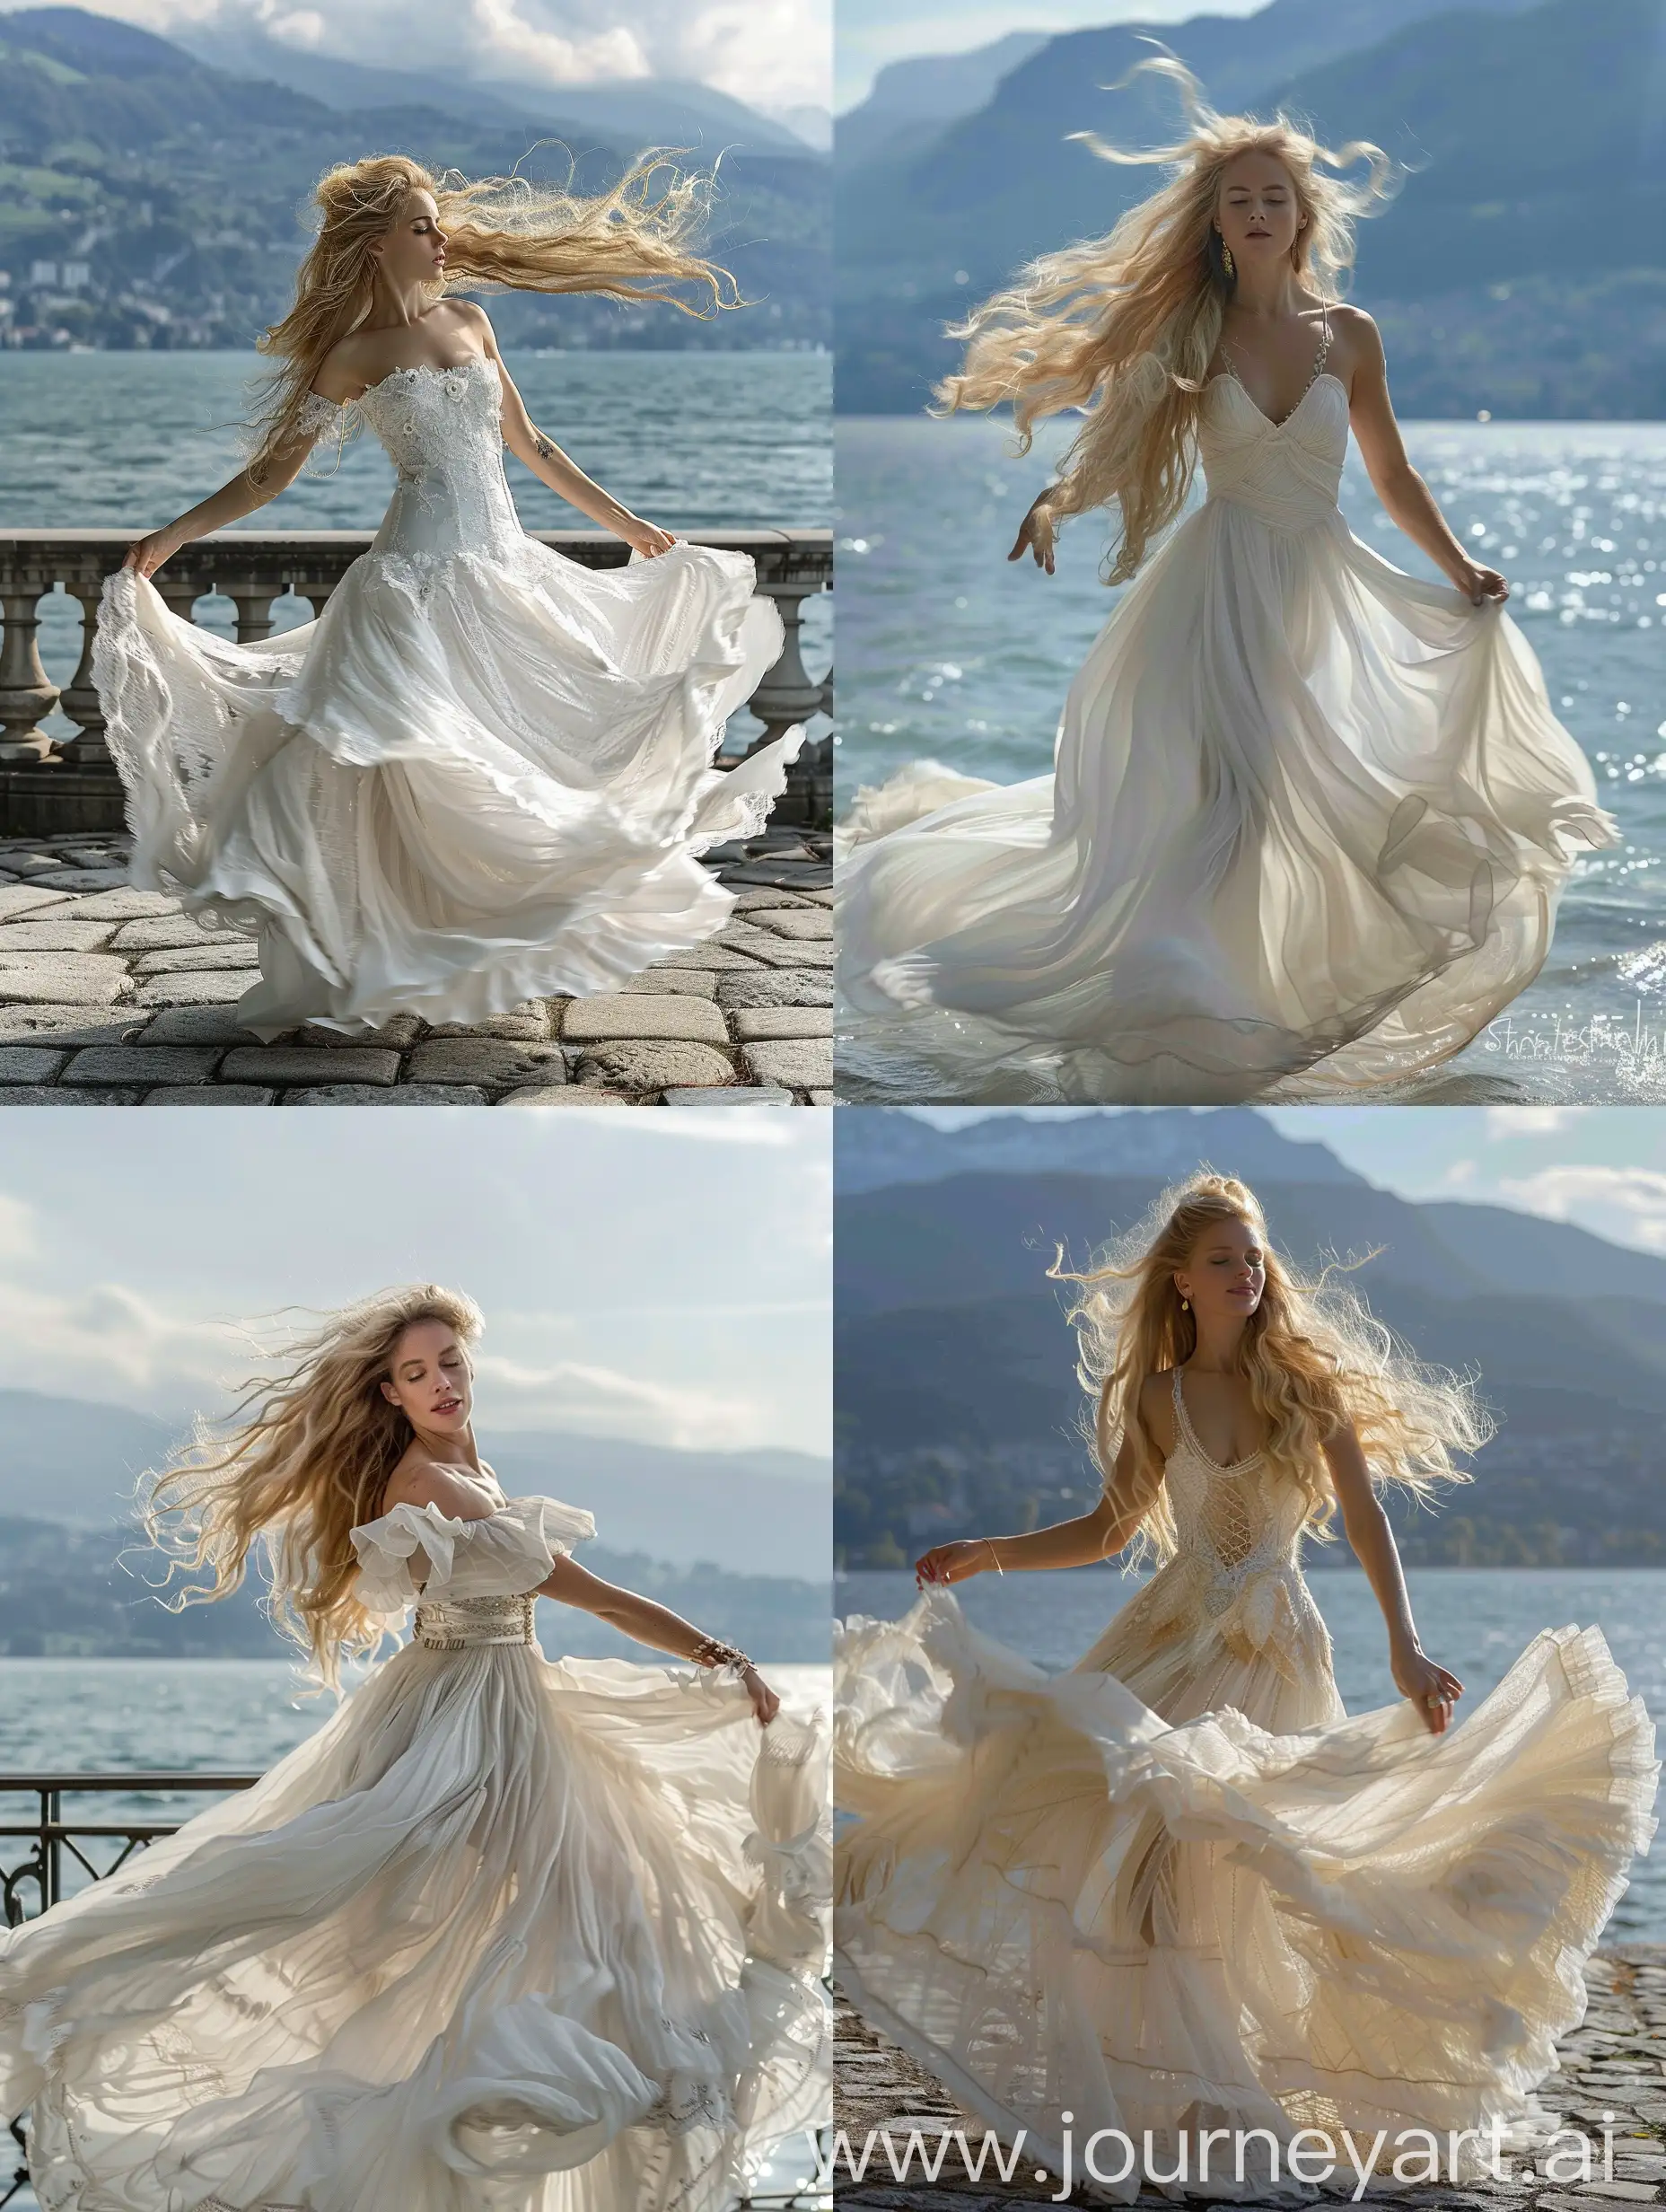 Scarlett Johansson with long blonde hair dancing in the scenery of Lake Geneva or Lake Leman in Switzerland in a white princess dress sexy front view full length , Just like Scarlett Johansson